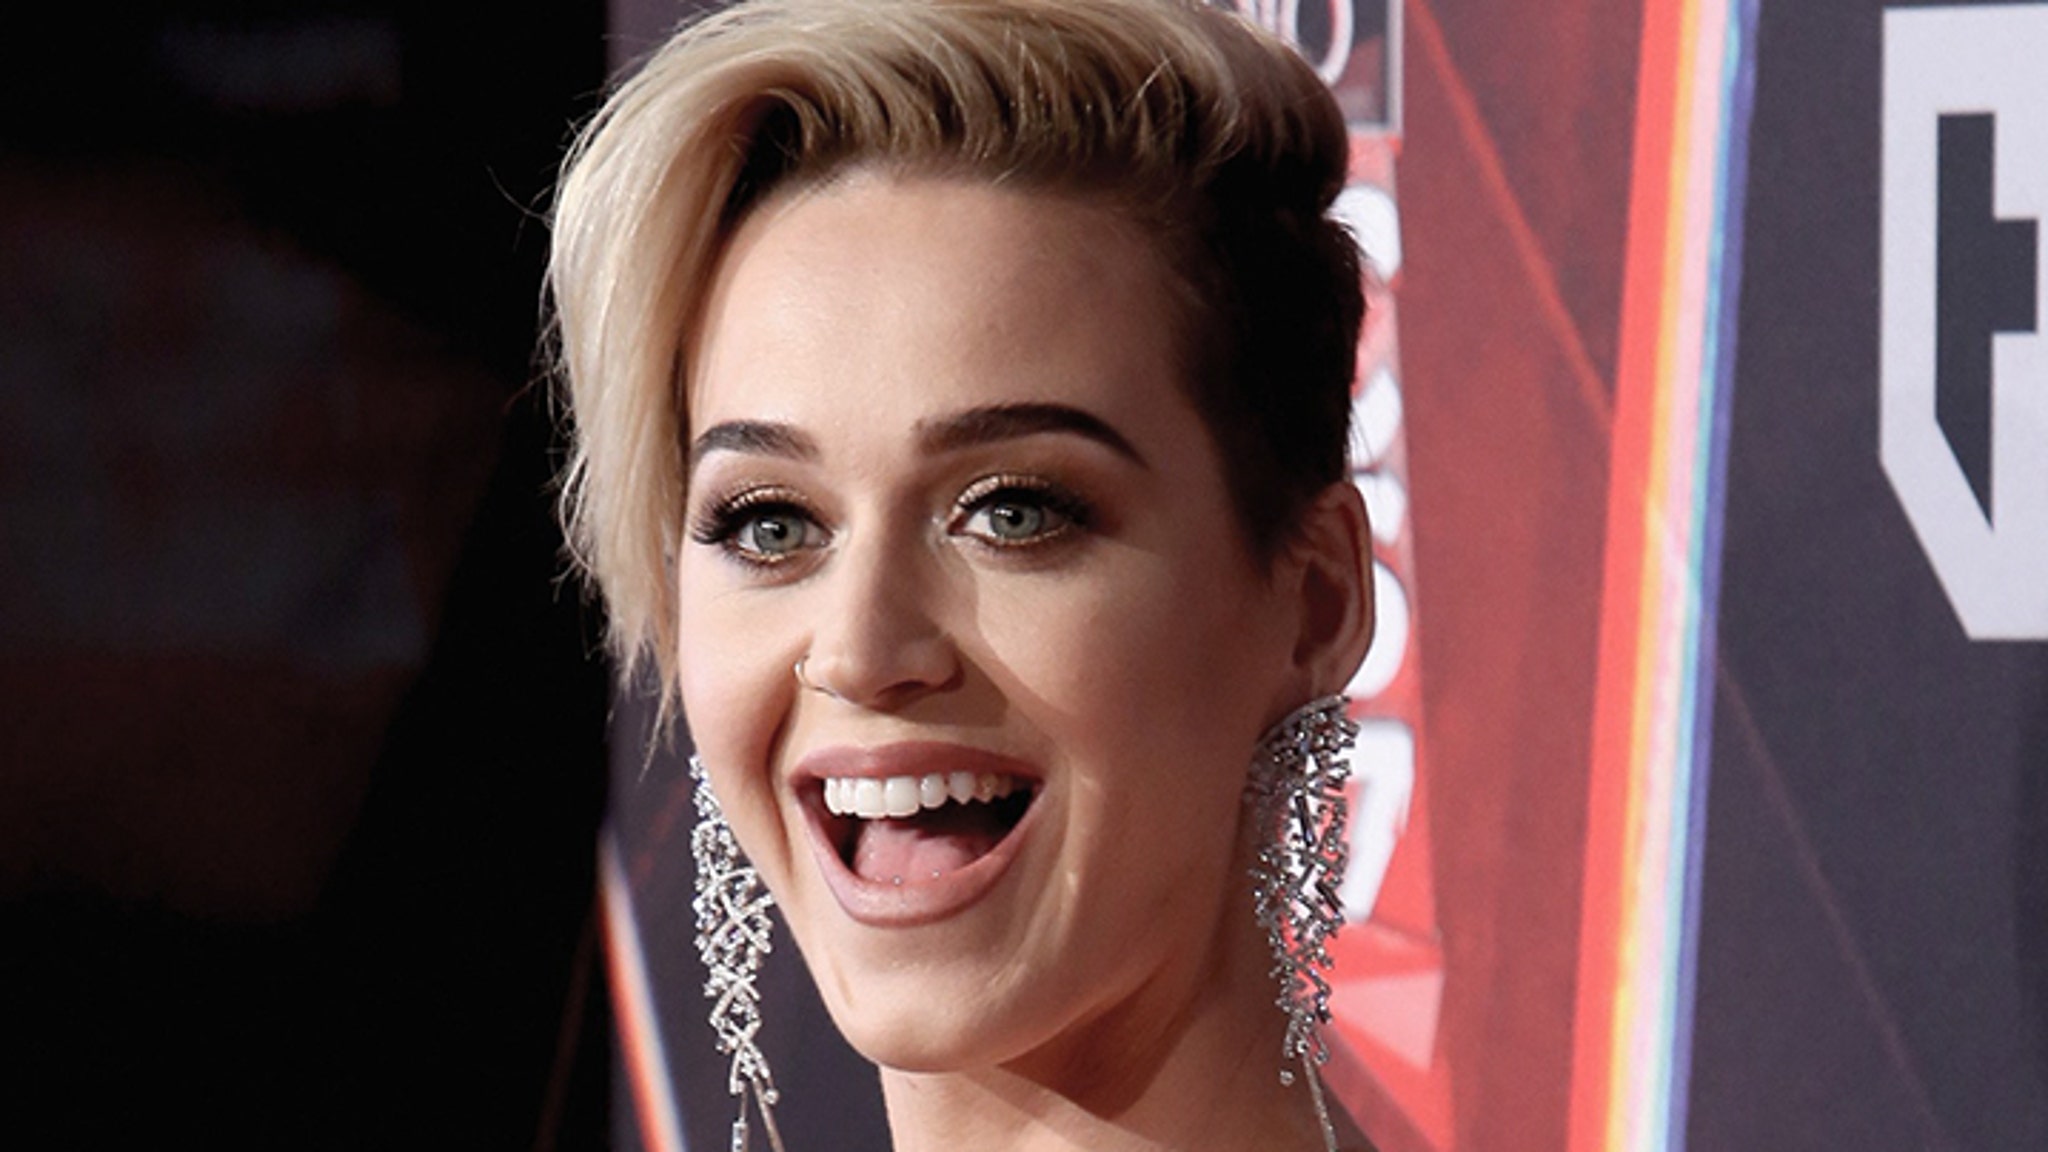 Katy Perry's Live Stream Leading To Live Concert